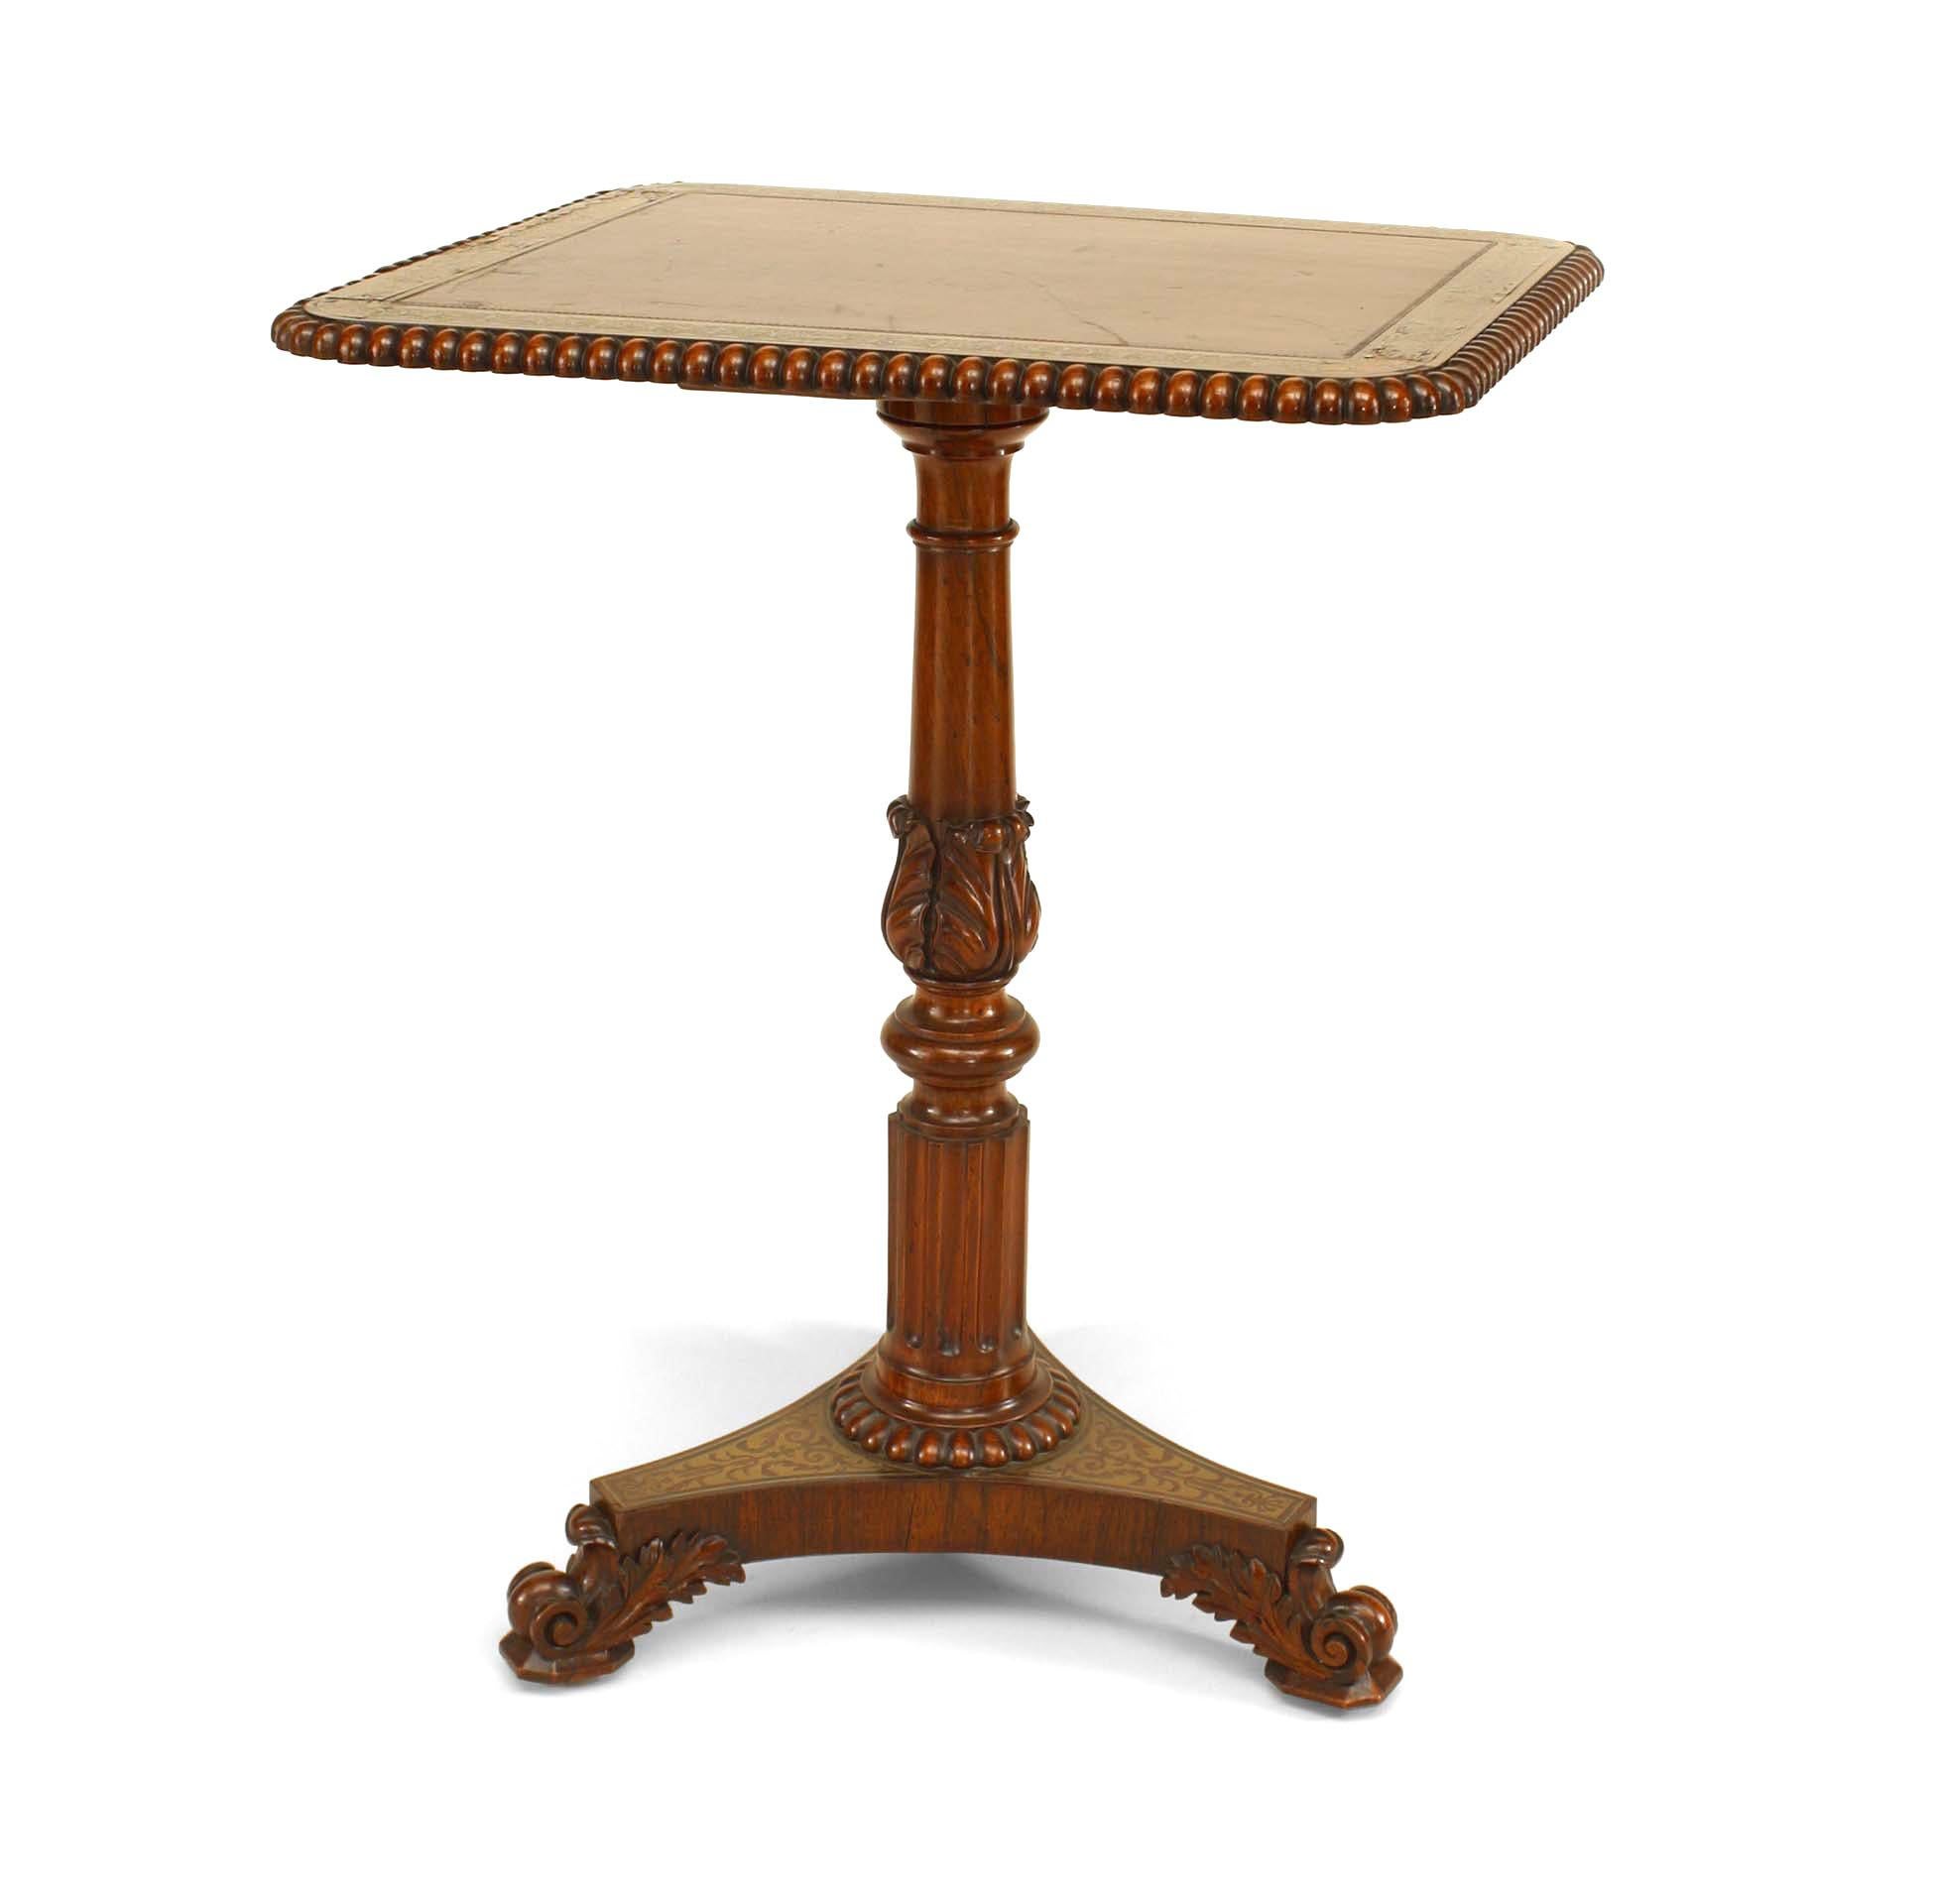 English Regency rosewood and brass inlaid pedestal base end table with inset red leather top and spool design edge.